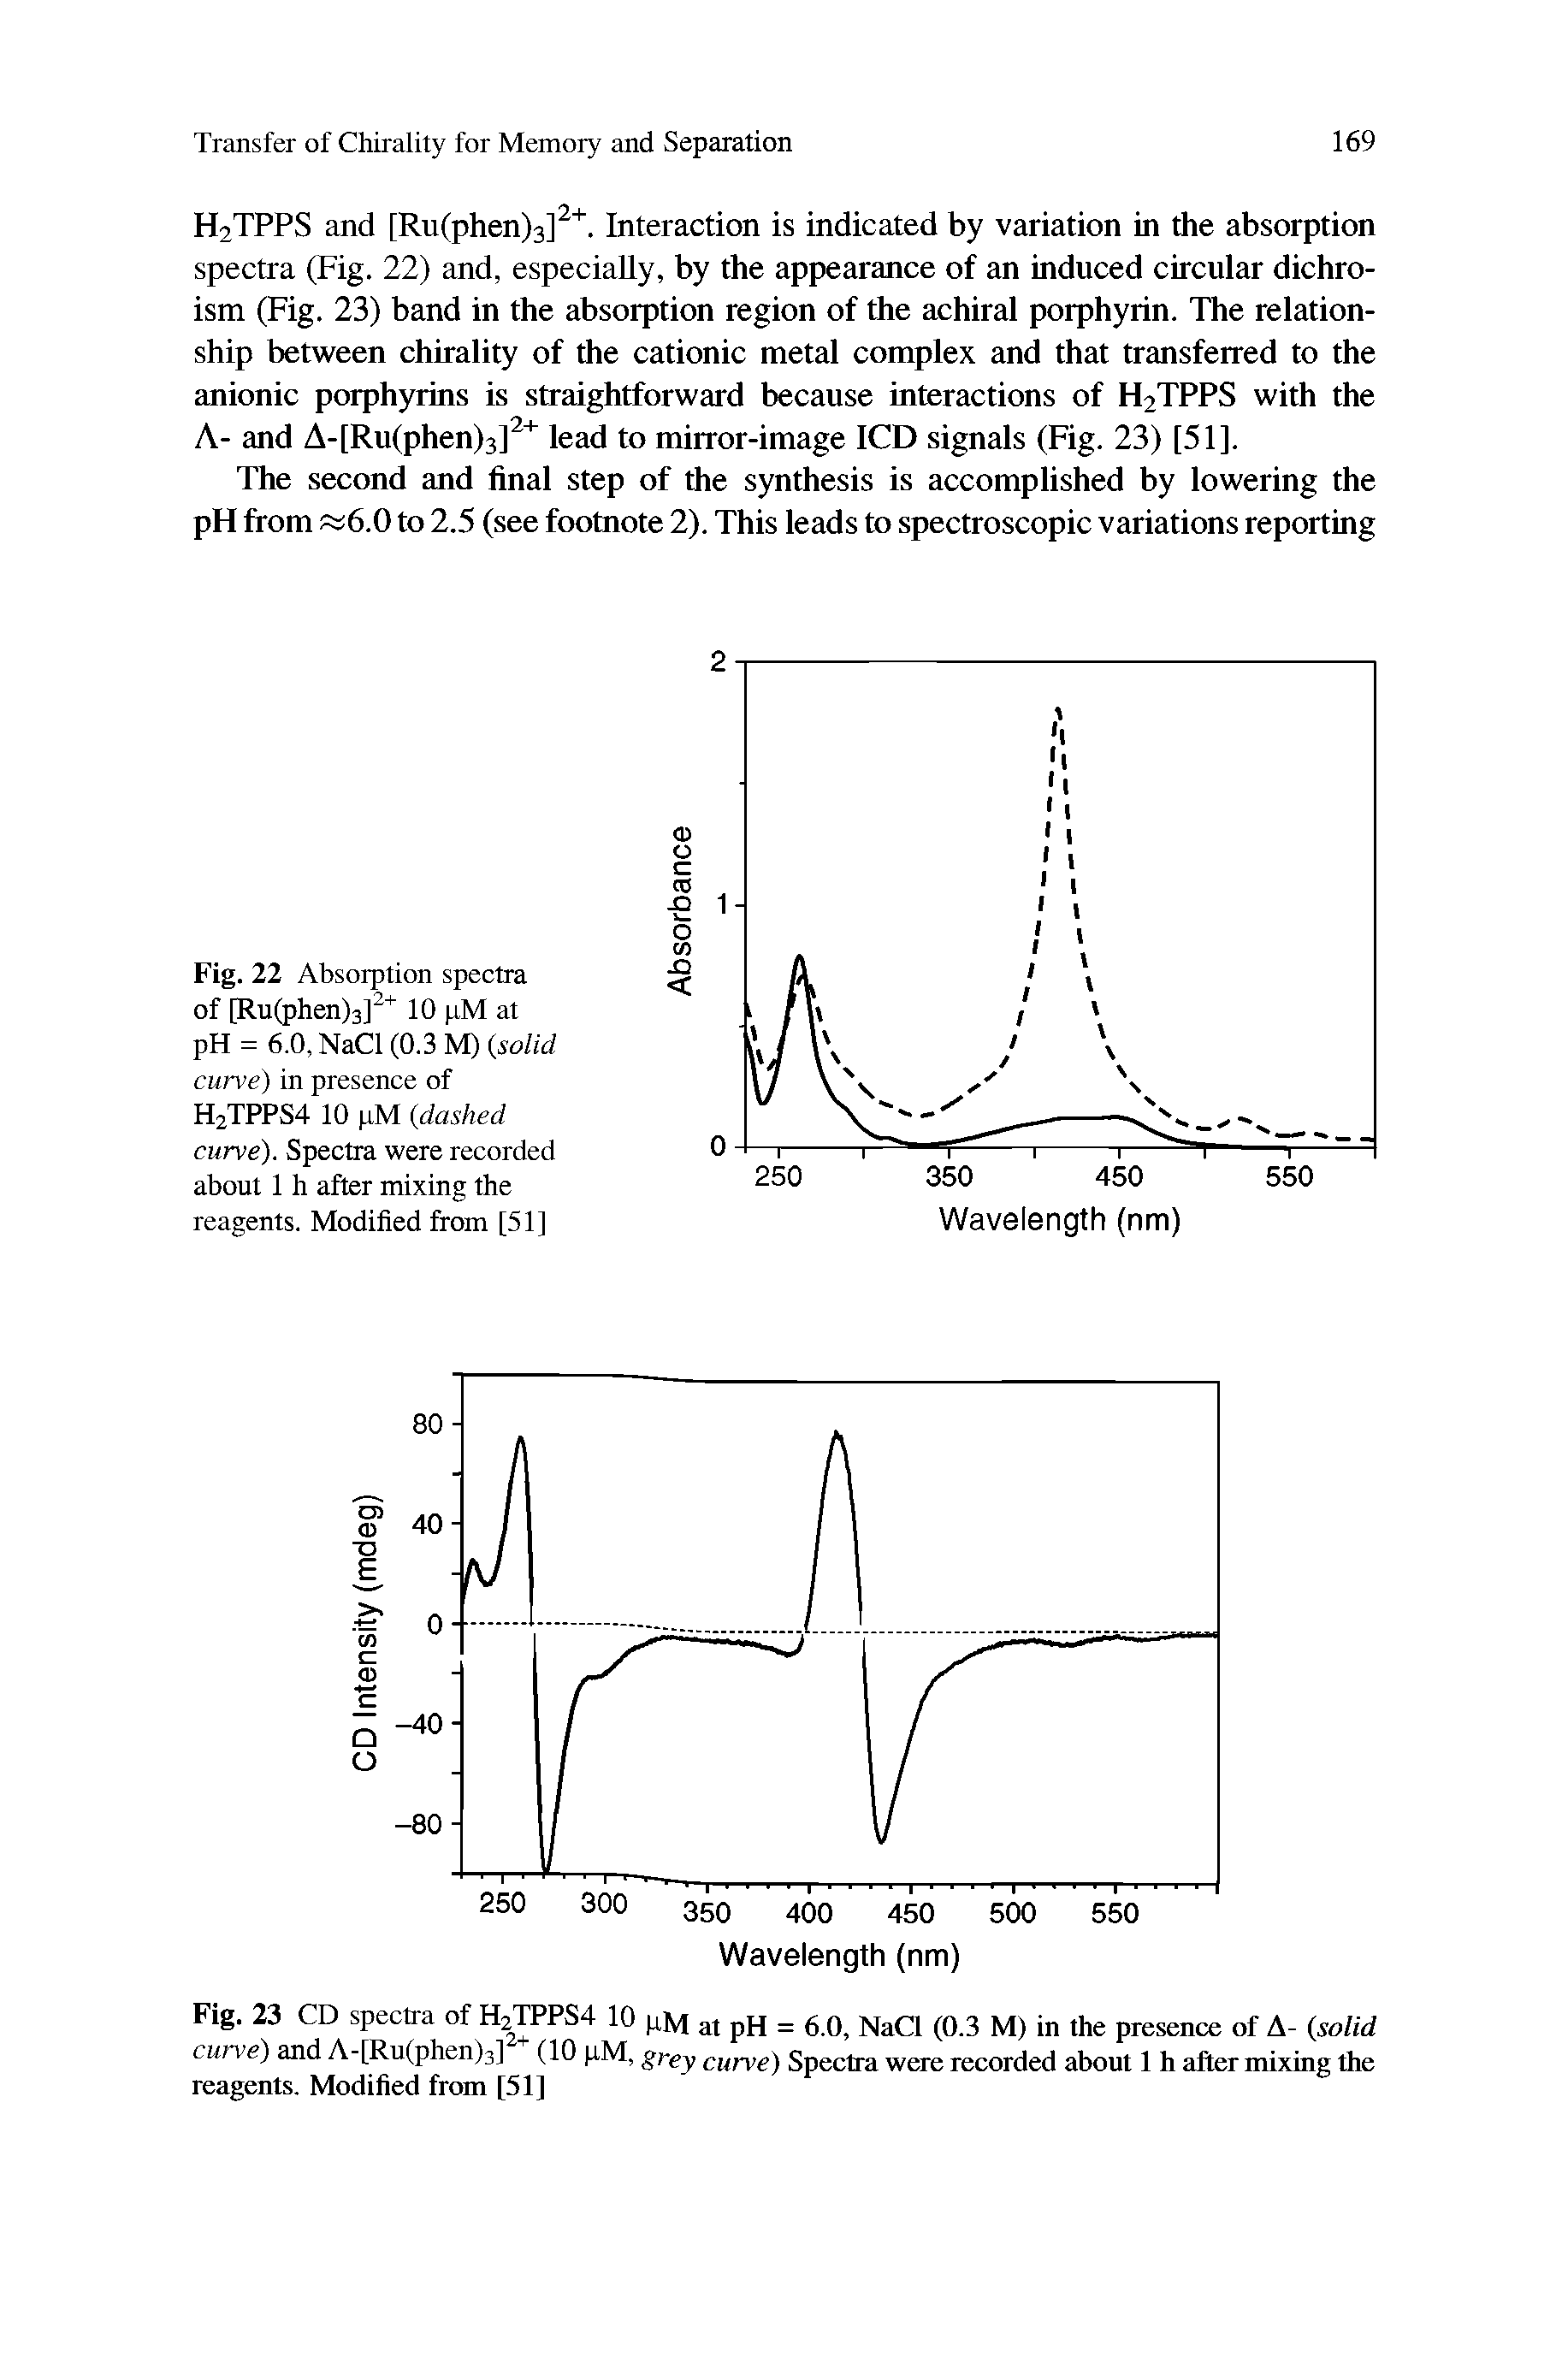 Fig. 22 Absorption spectra of [Ru(phen)3]2+ 10 pM at pH = 6.0, NaCl (0.3 M) (solid curve) in presence of H2TPPS4 10 pM (dashed curve). Spectra were recorded about 1 h after mixing the reagents. Modified from [51]...